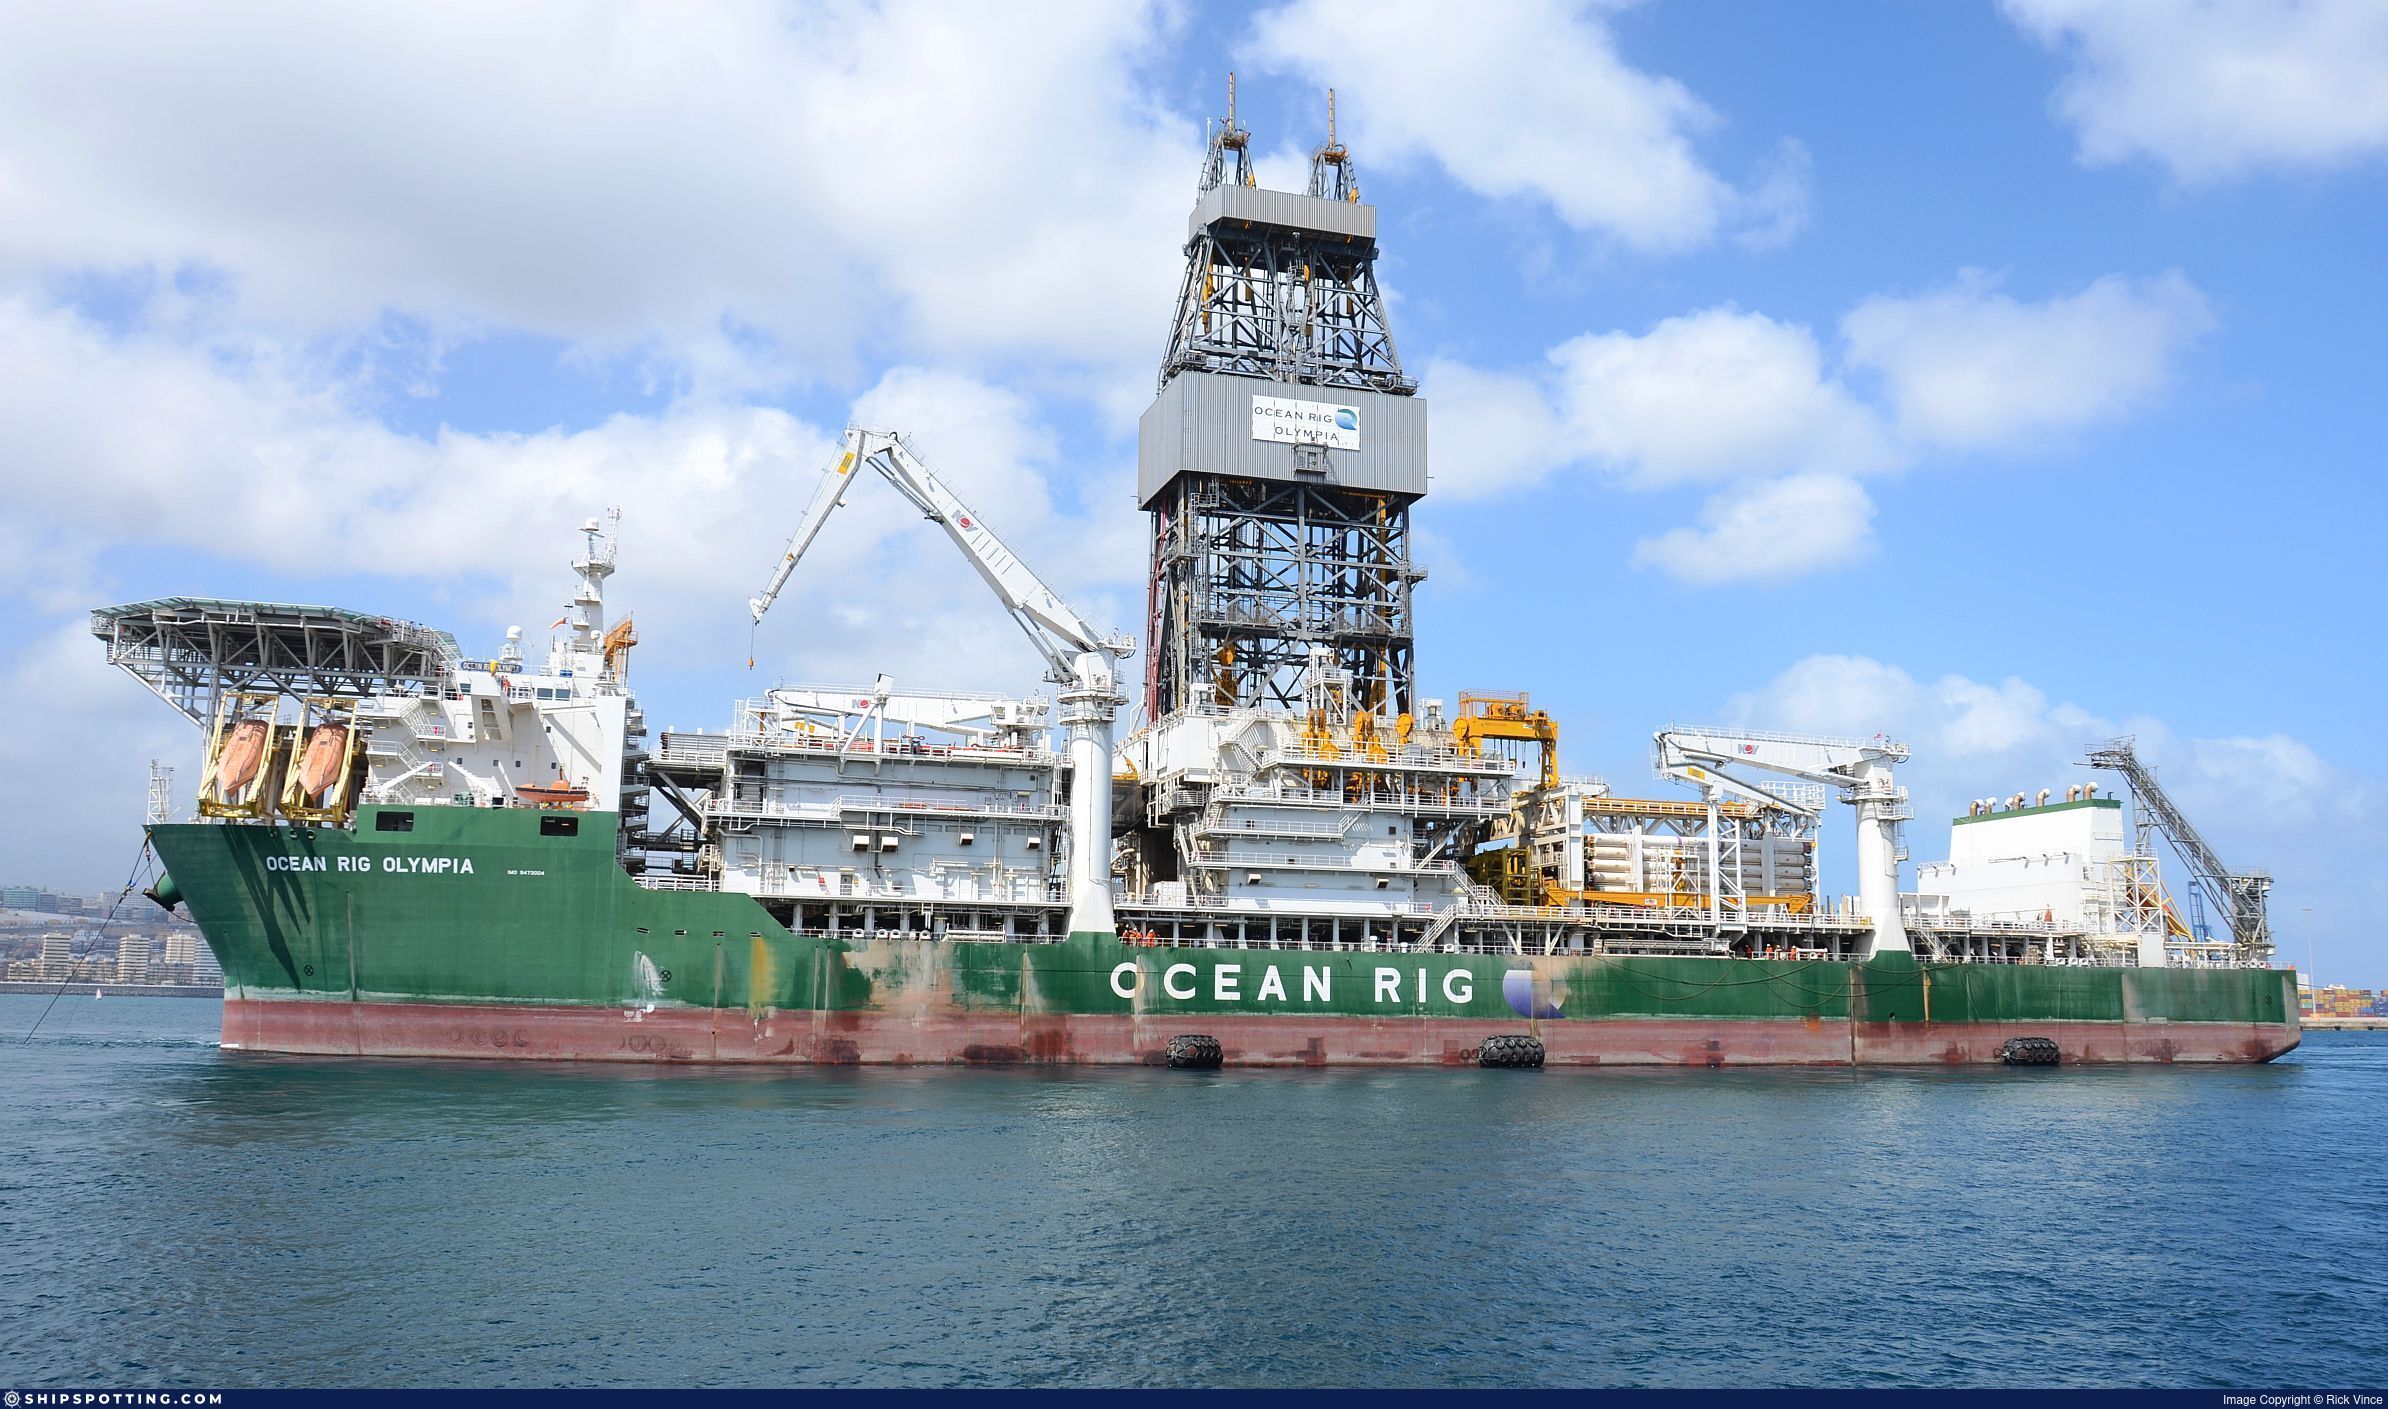 Transocean's Olympia Production Support Vessel